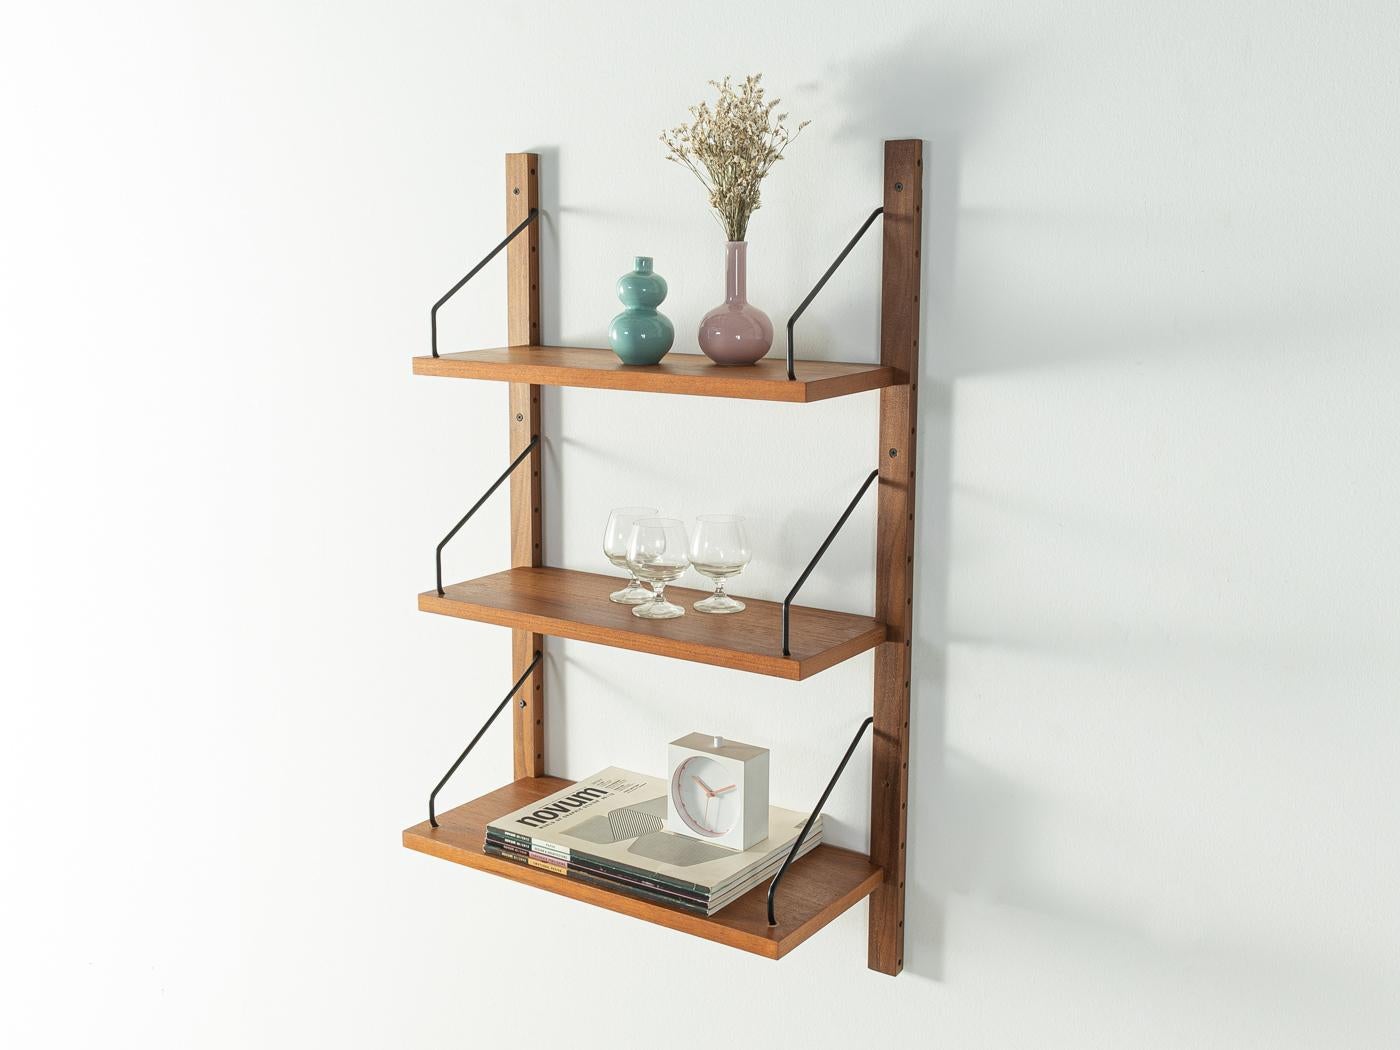 Classic shelving system from the 1950s. The high-quality shelves are veneered in teak. The system consists of three shelves and two wooden ladders.
Quality Features:

 accomplished design: perfect proportions and visible attention to detail
